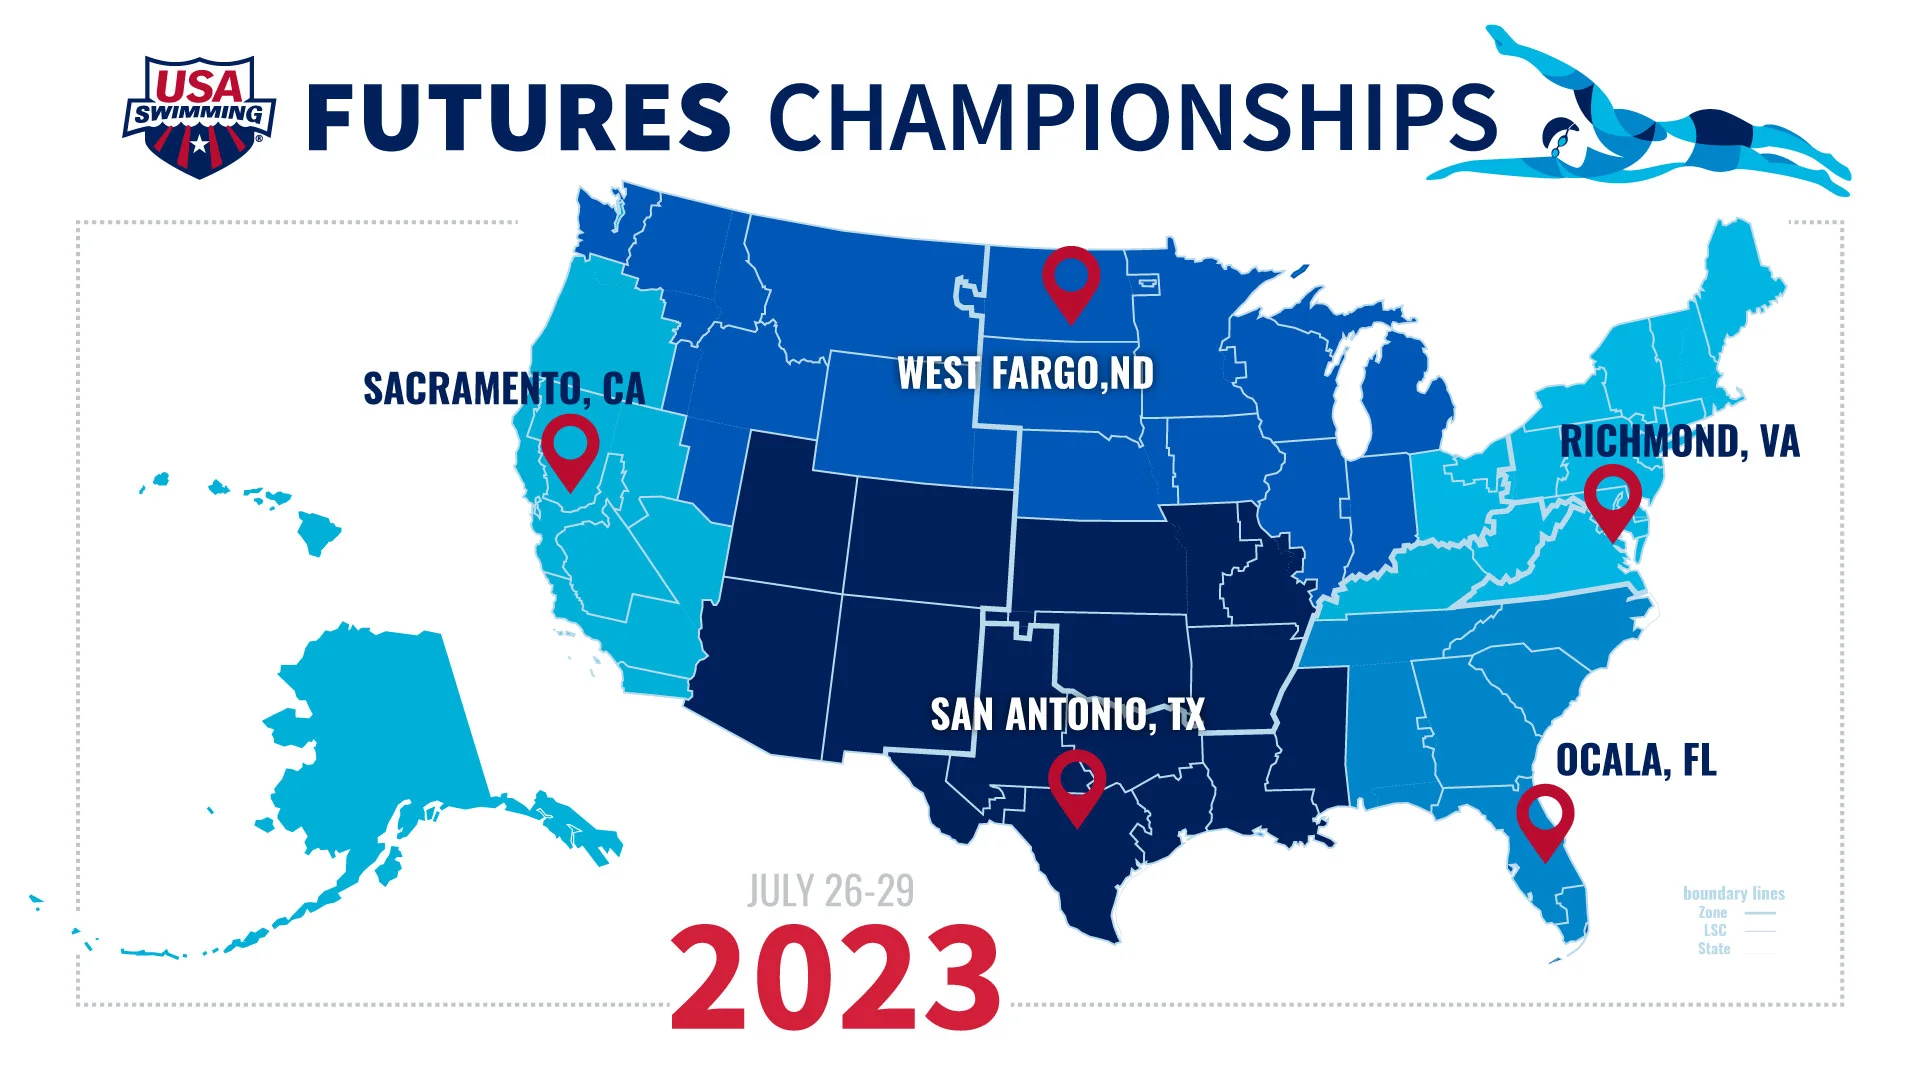 2023 U.S. National Championships Pick Up Where 2022 Left Off